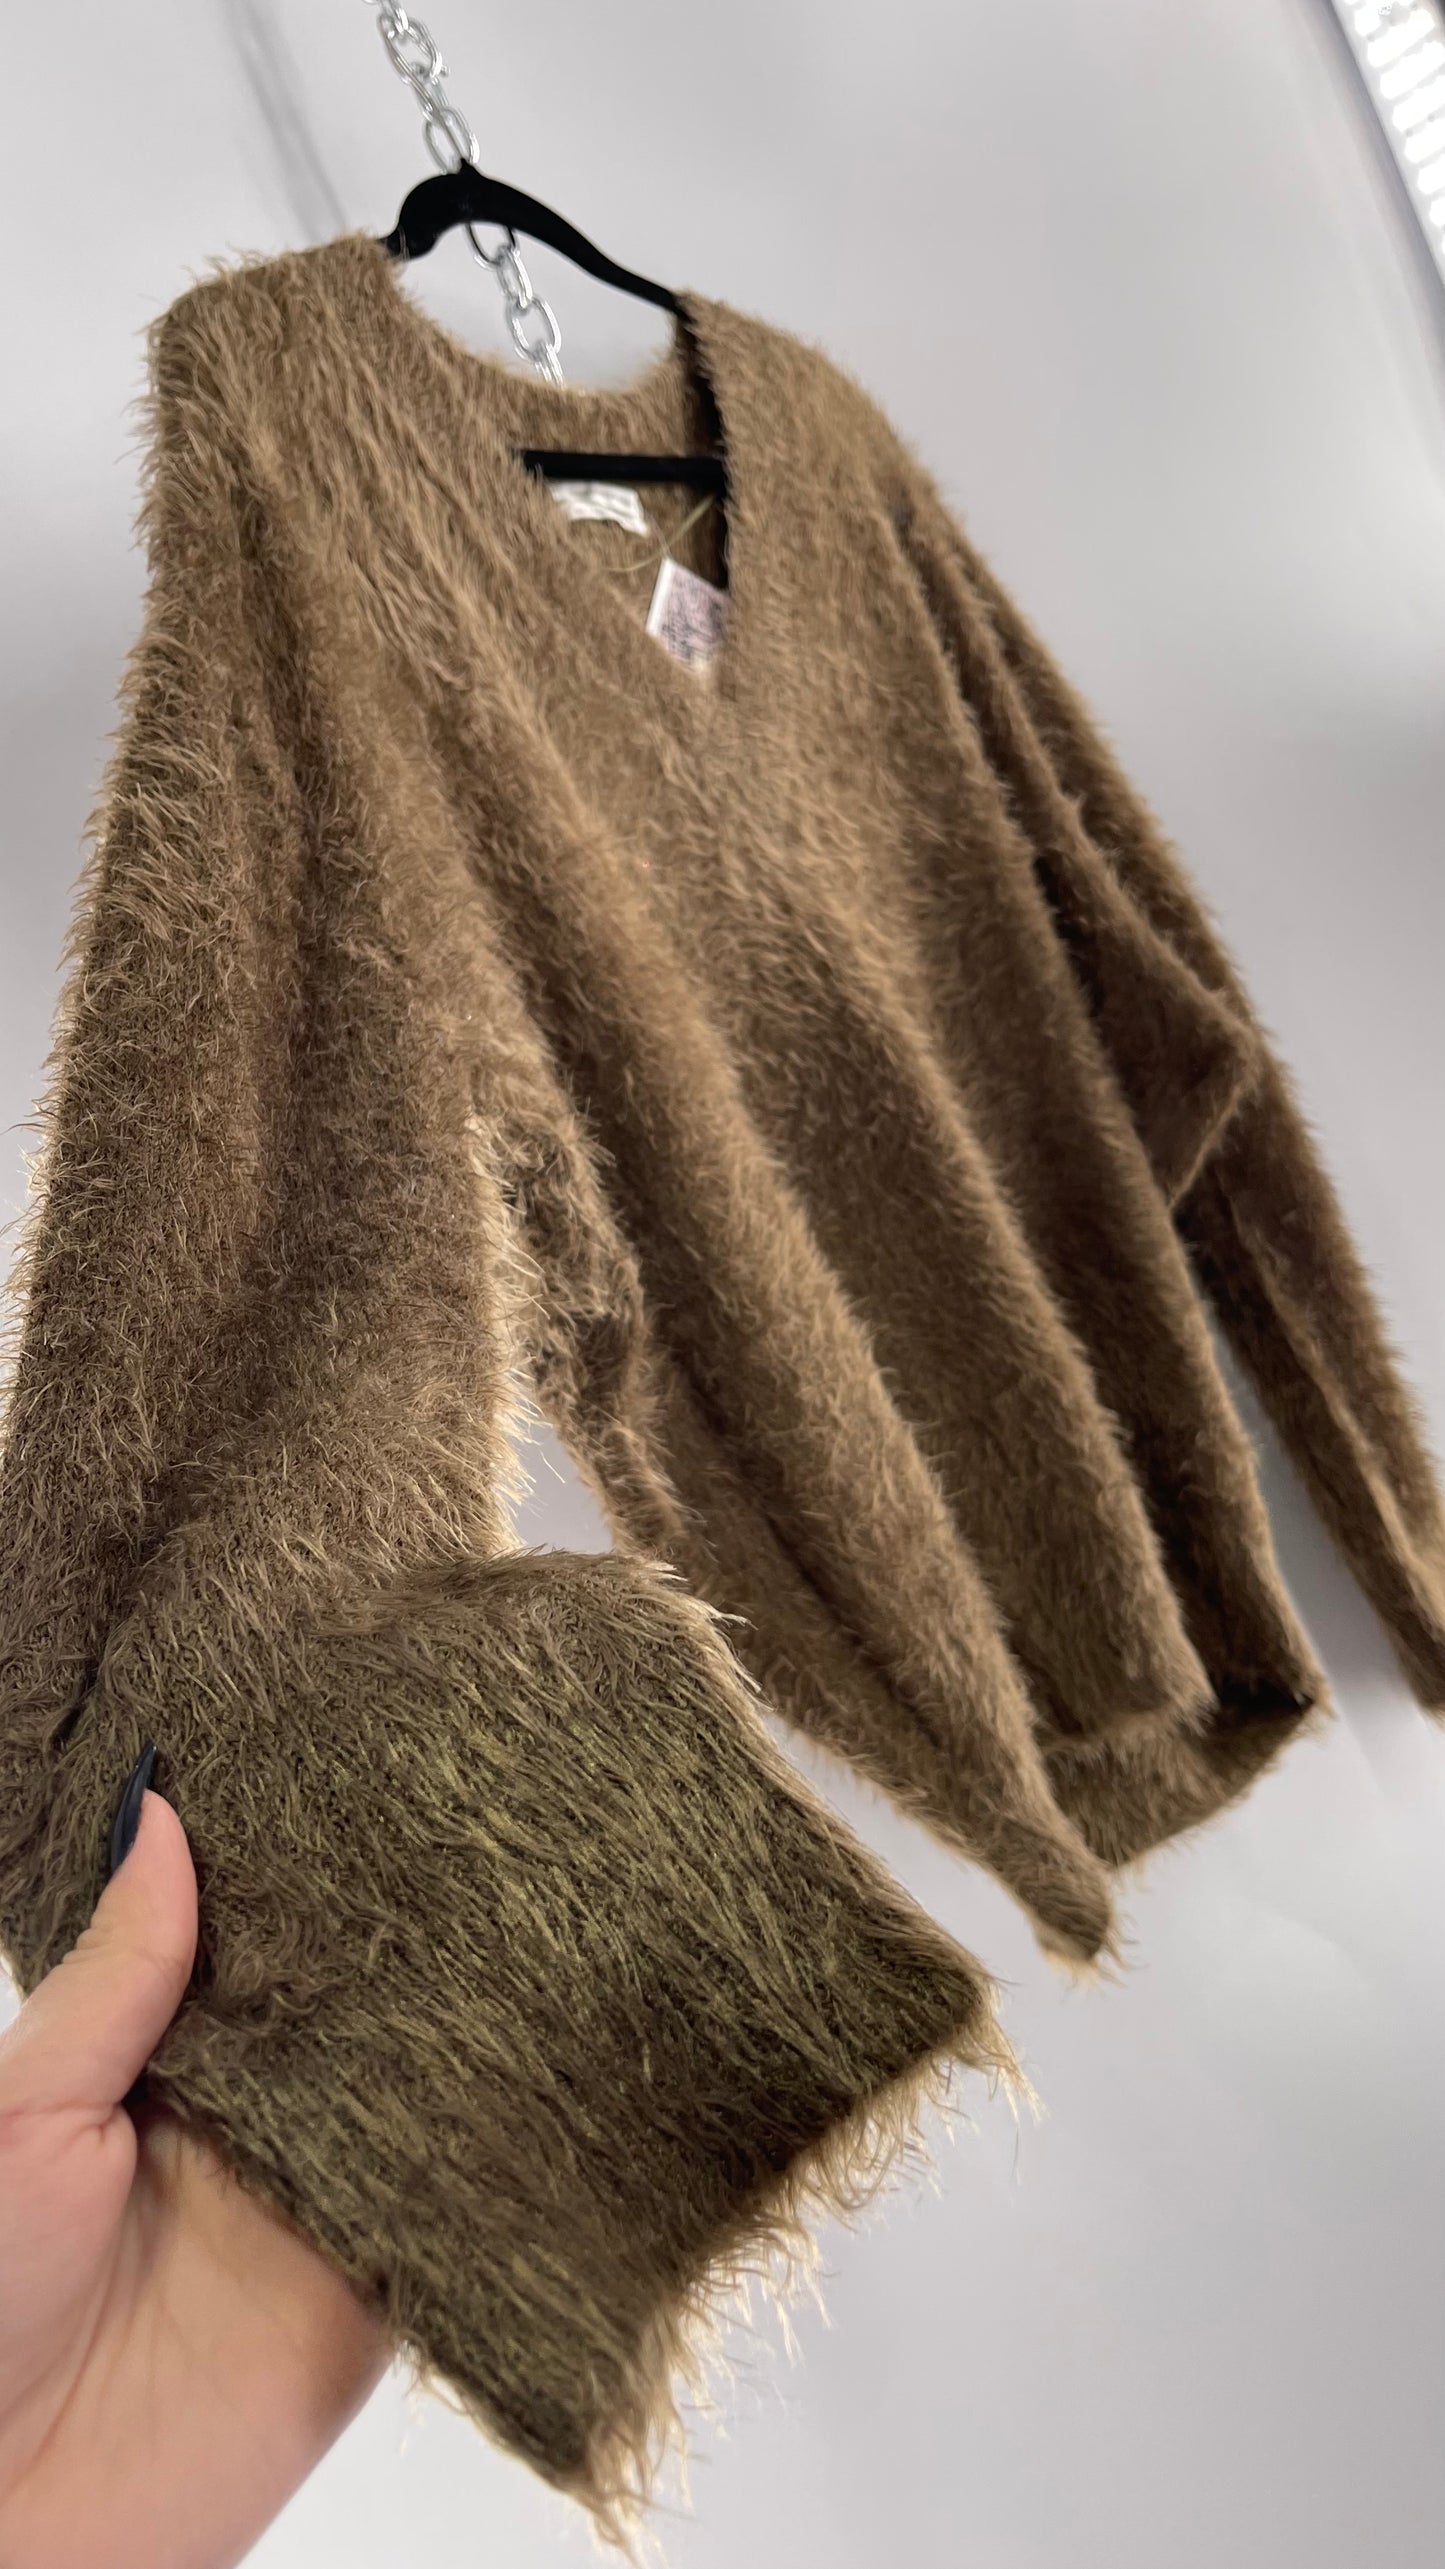 Urban Outfitters Olive Shag Fuzzy Sweater (Medium)